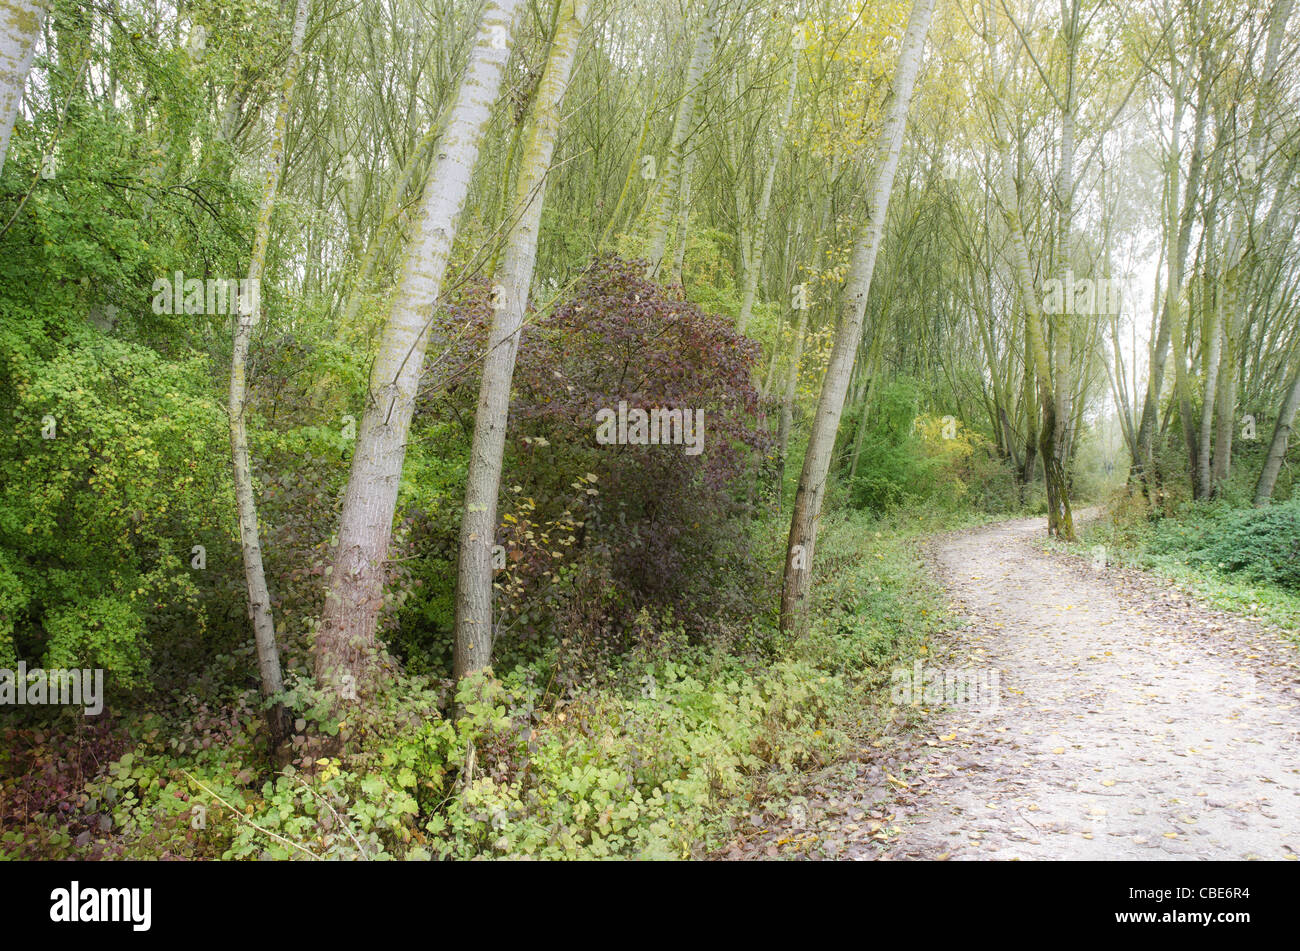 Riparian forest adjacent to Chiusi Lake, in Tuscany, Italy. Stock Photo